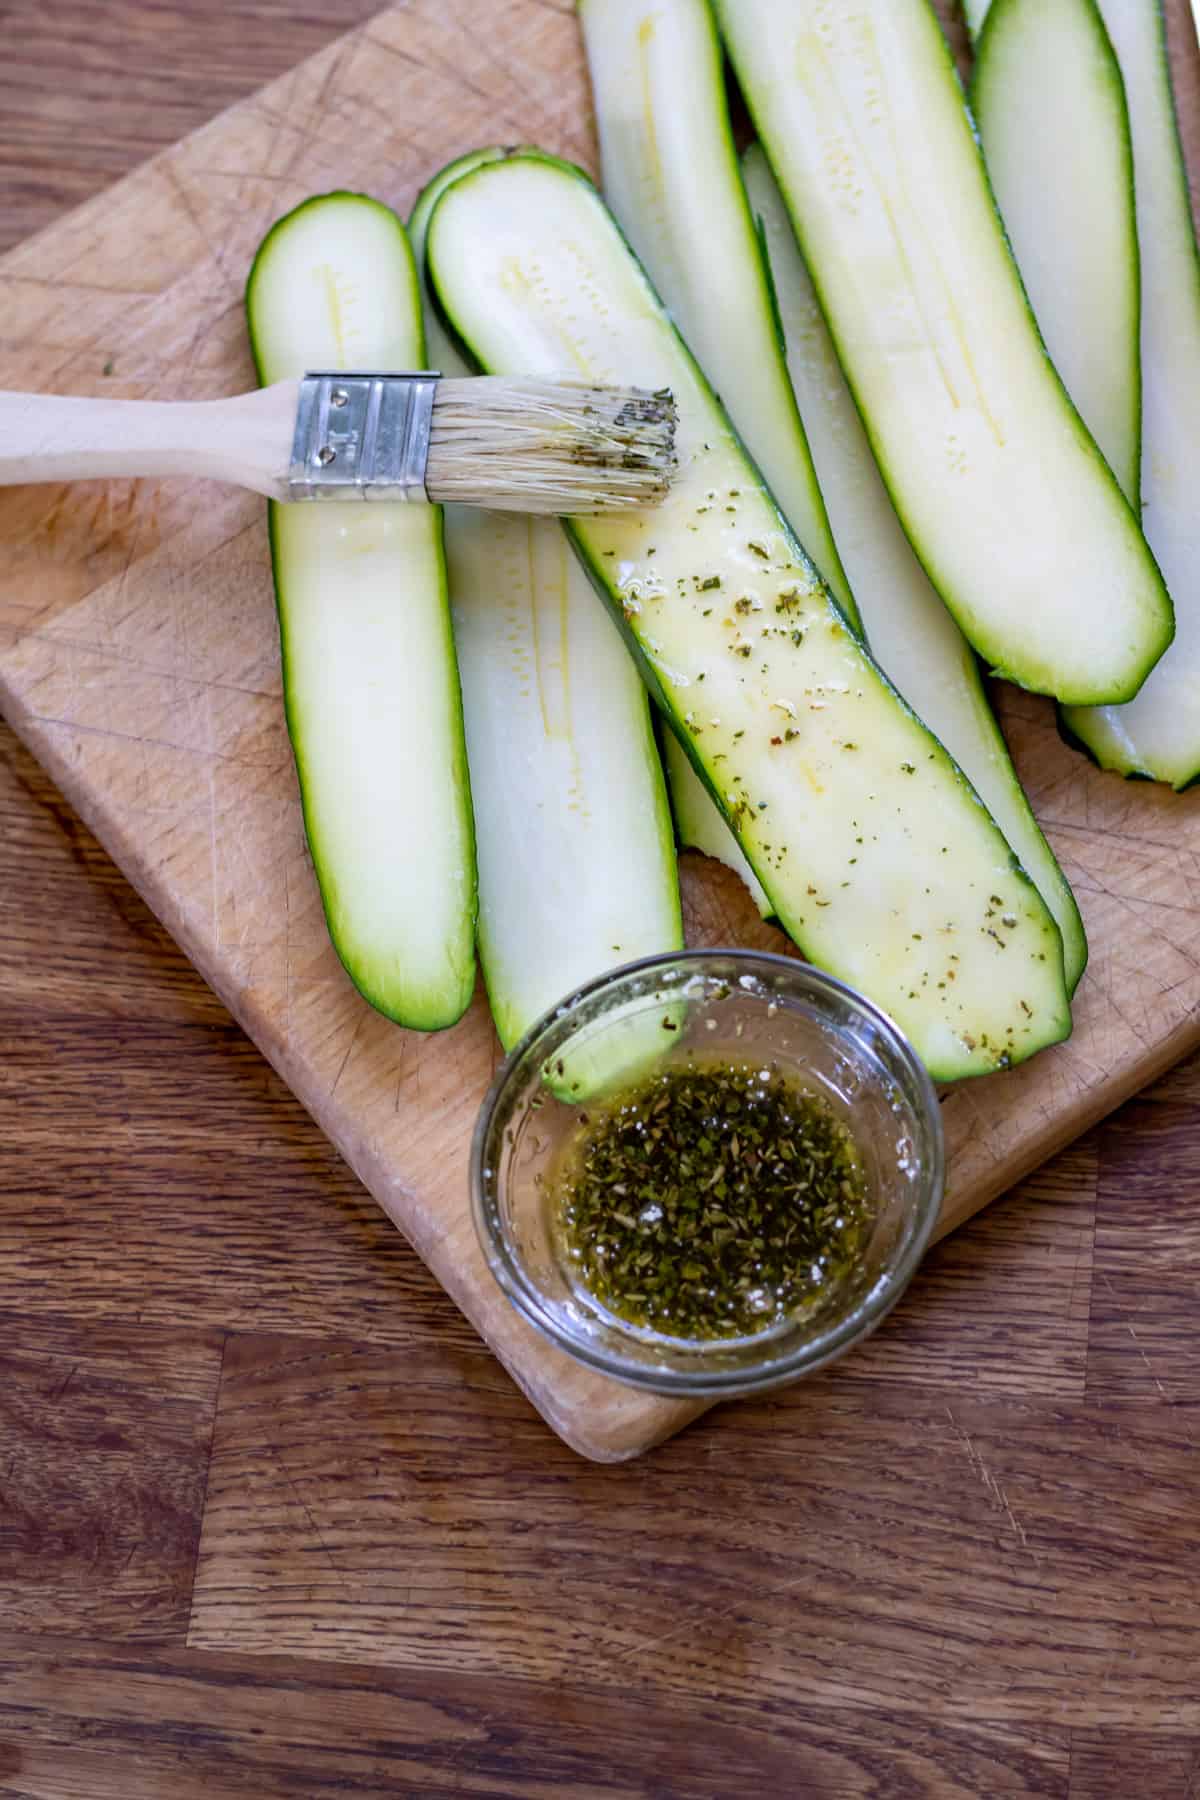 Brushing the zucchini with oil and seasoning.